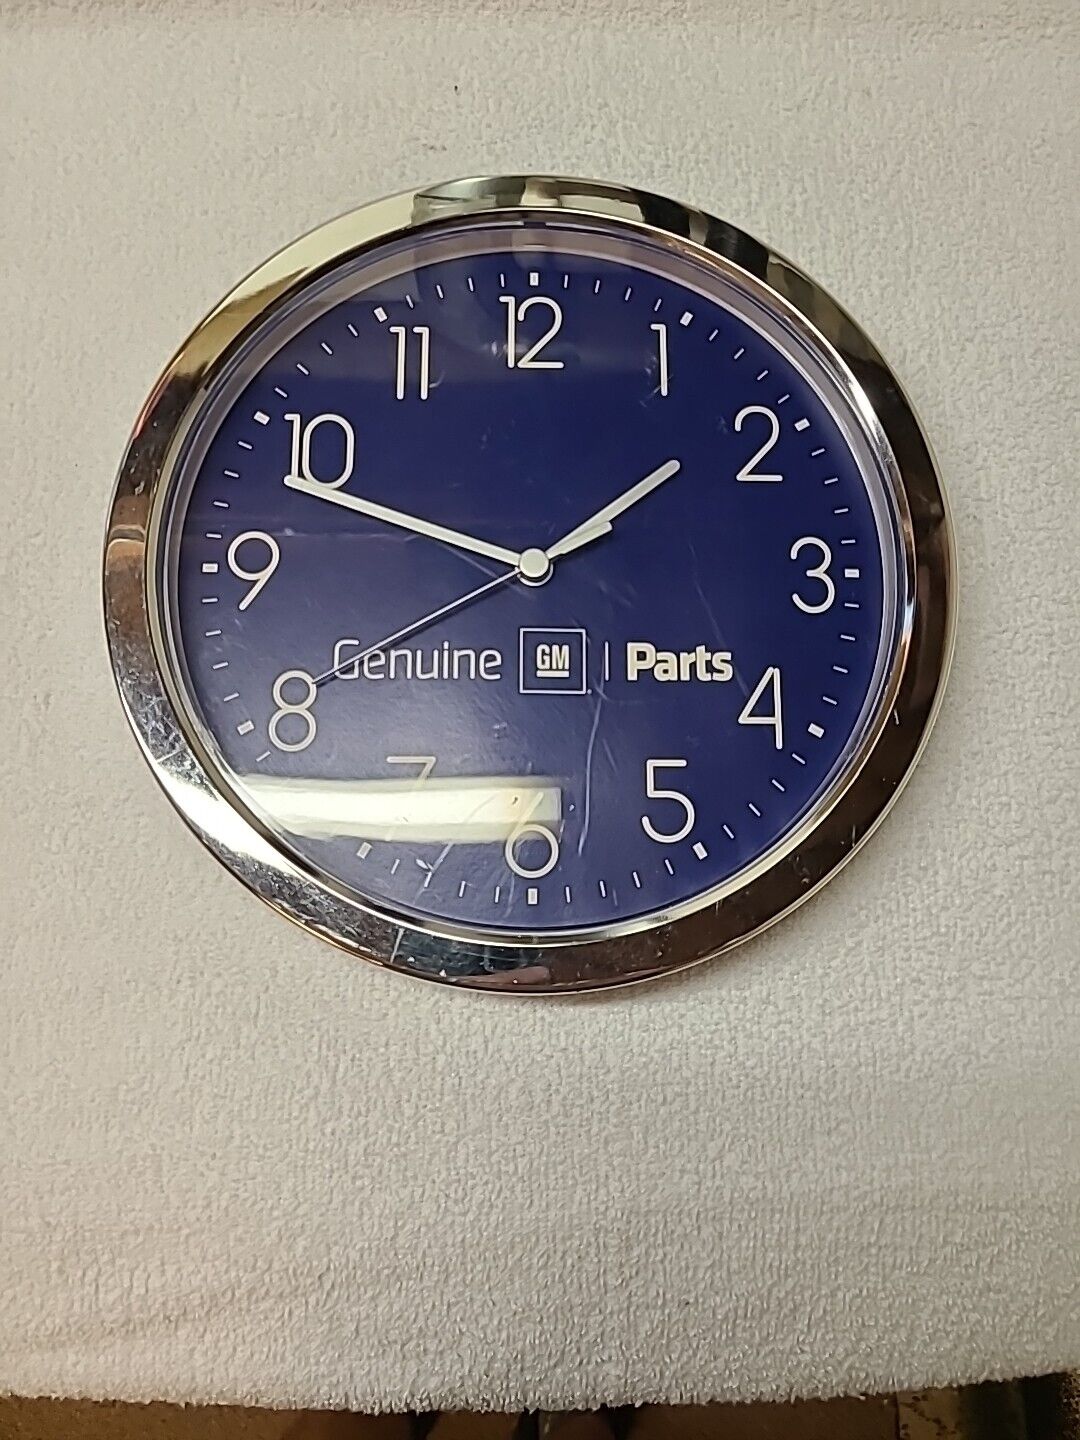 GM Genuine Parts Wall Clock with New Duracell AA Battery